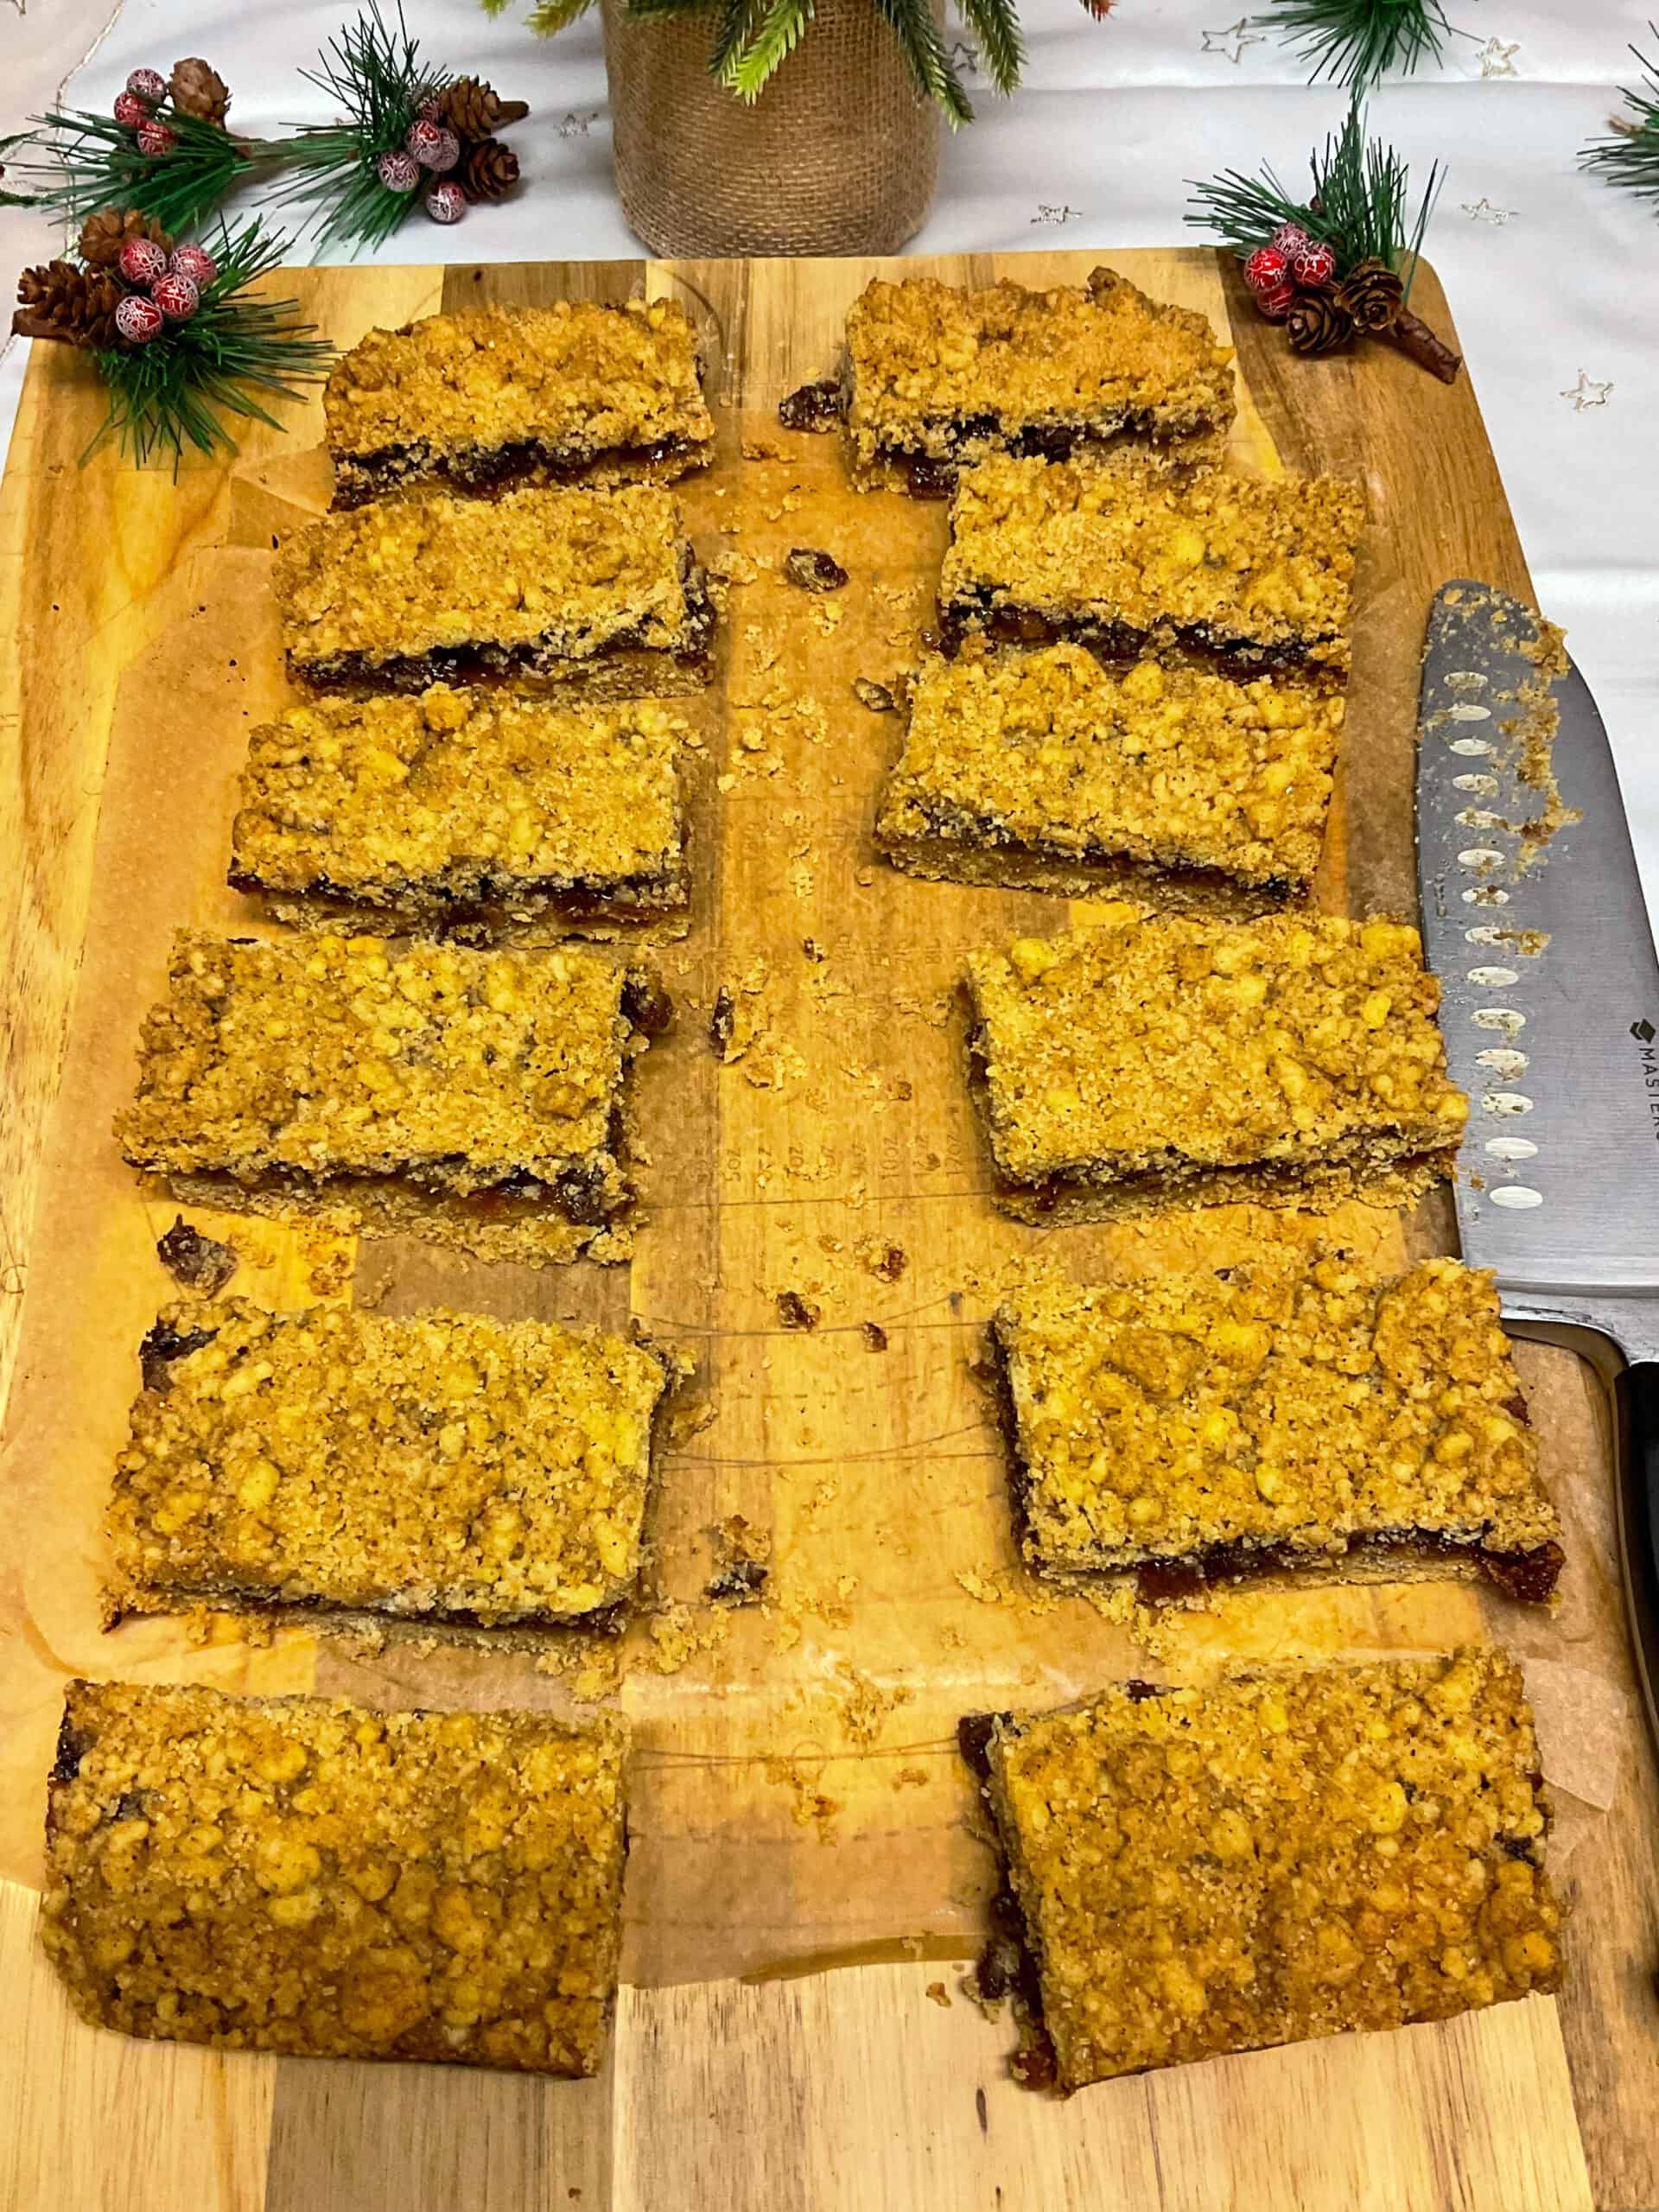 Mincemeat crumble traybake sliced into 12 bars on a cutting board.